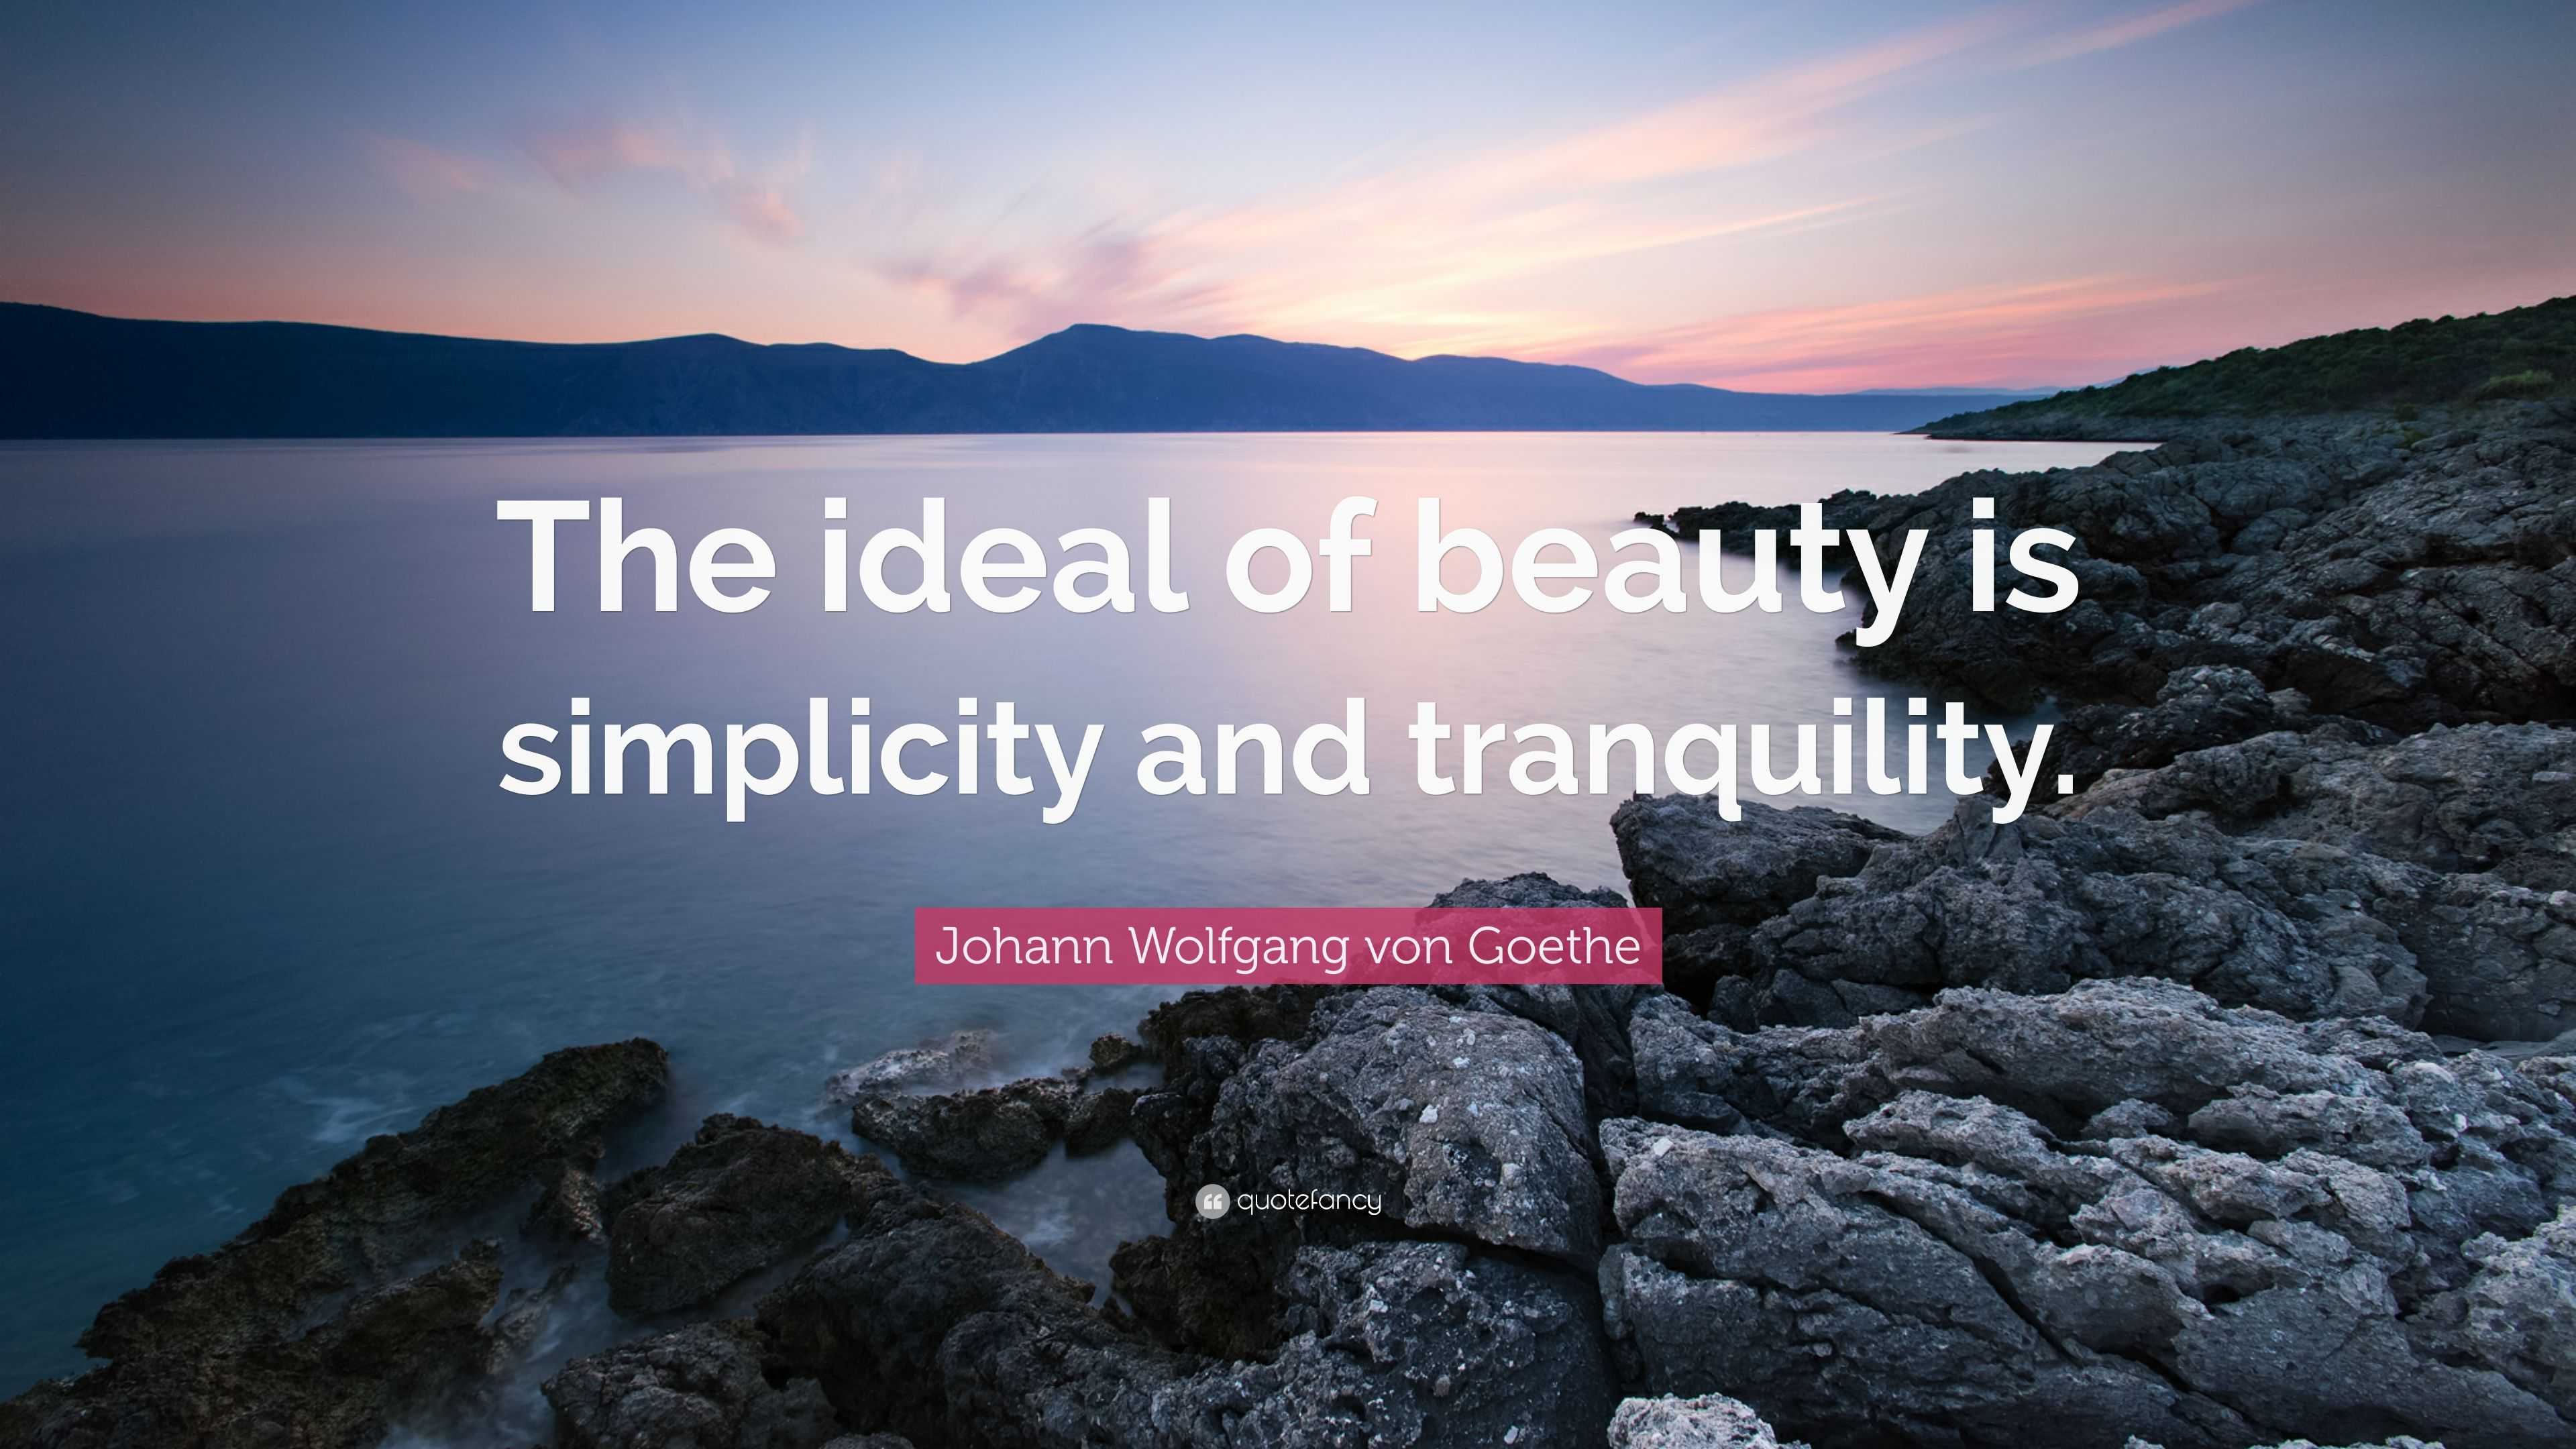 Johann Wolfgang von Goethe Quote The ideal of beauty is simplicity 